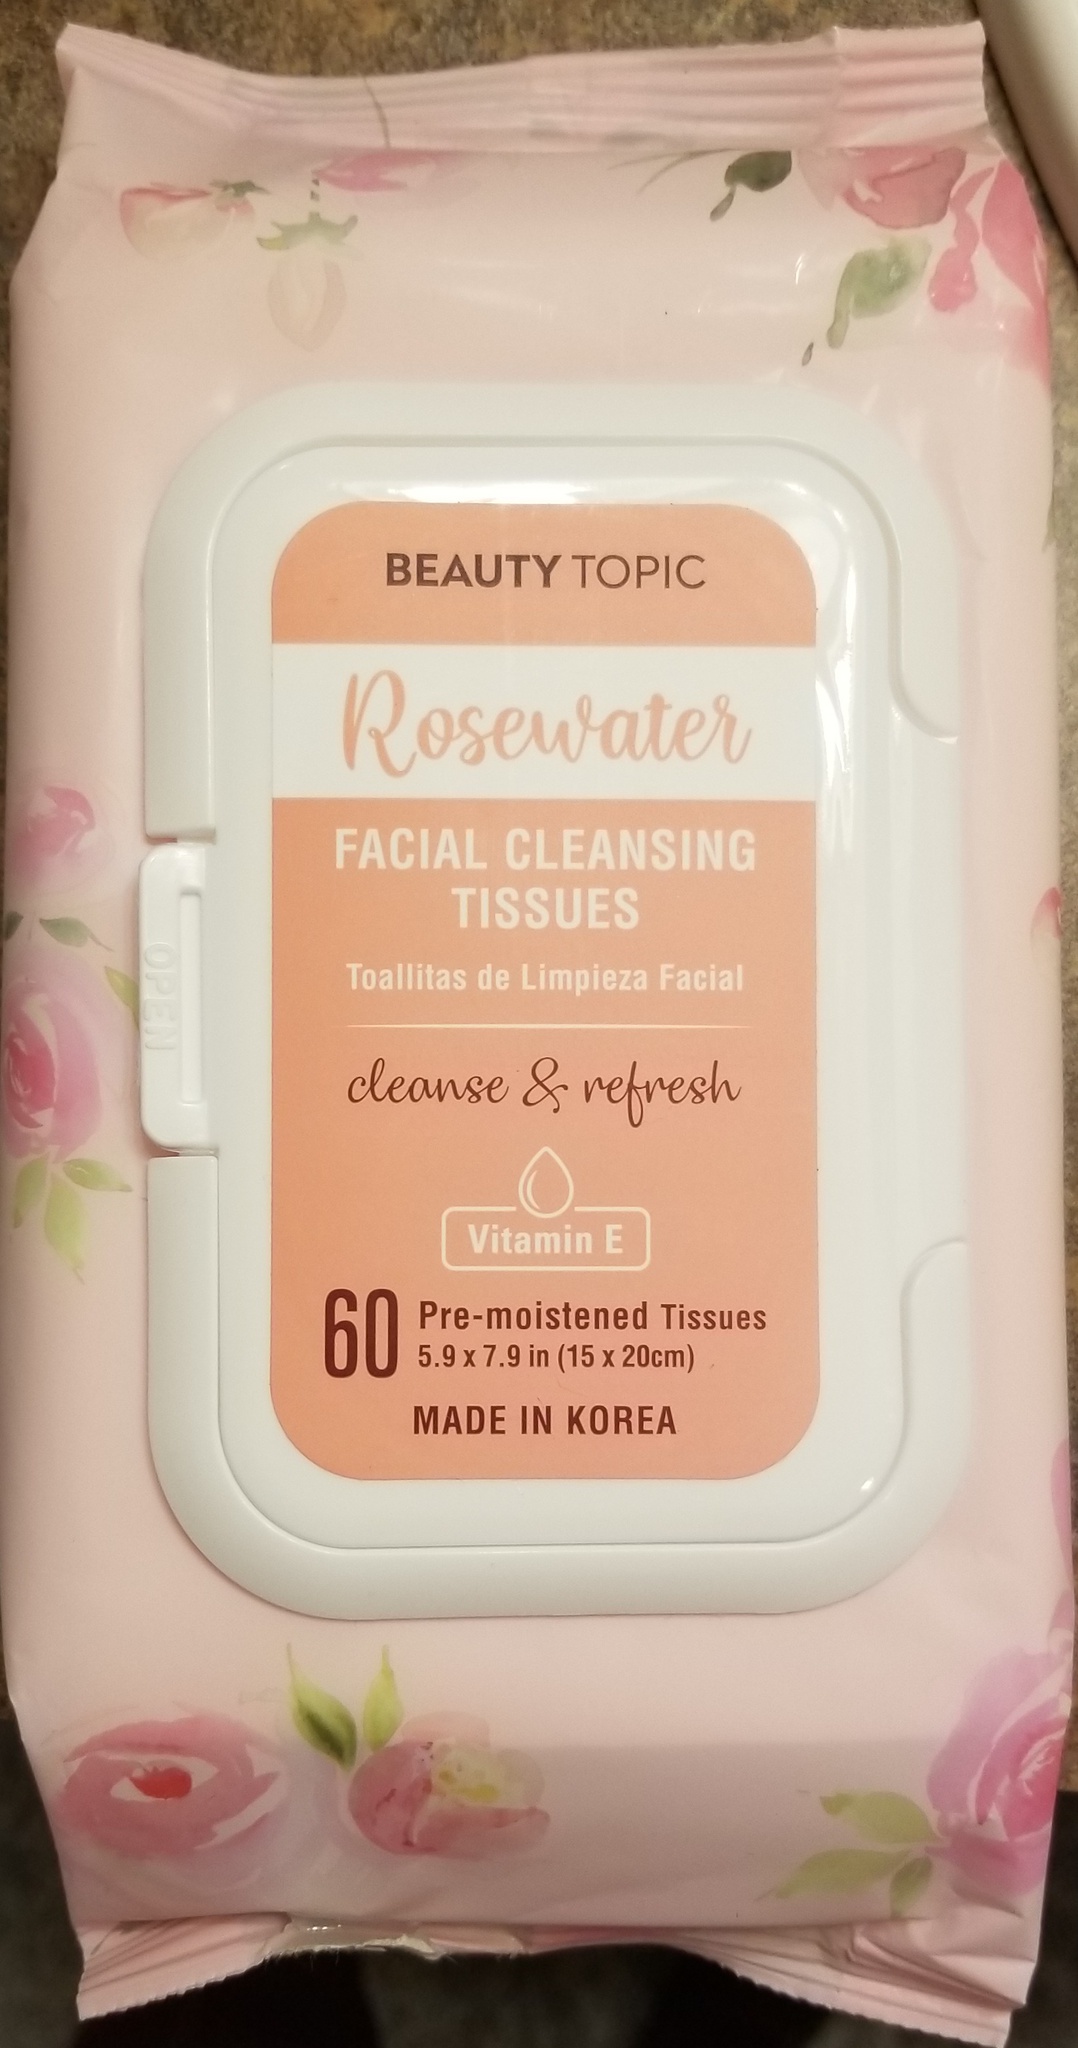 Beauty Topic Rosewater Facial Cleansing Tissues